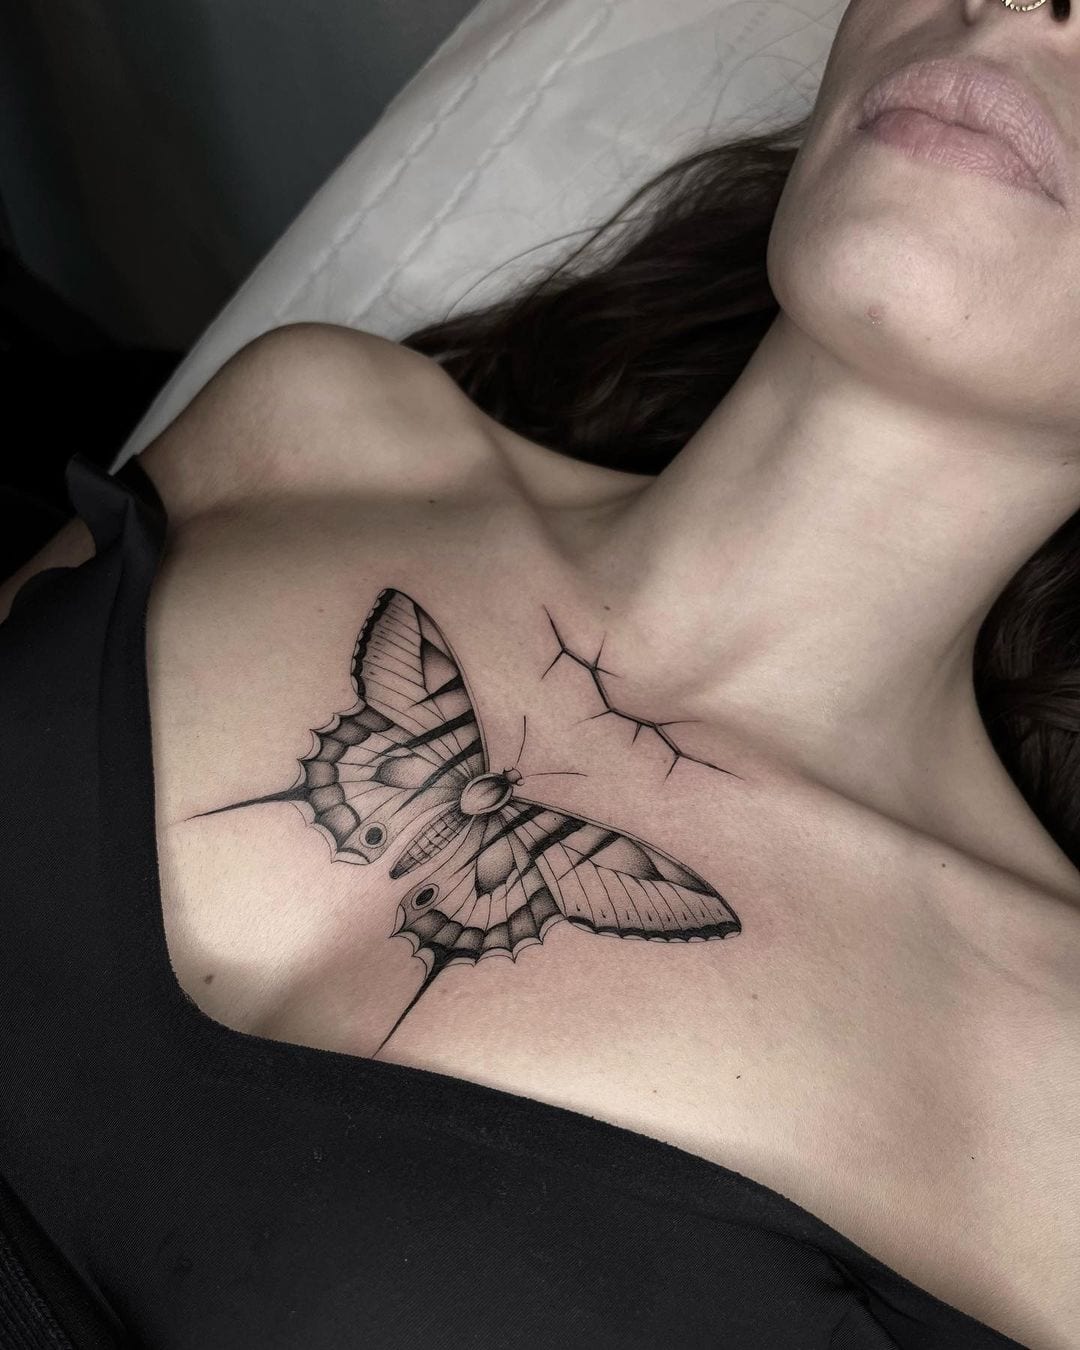 Minimalistic One Line Tattoos That Will Leave You Itching To Get Inked